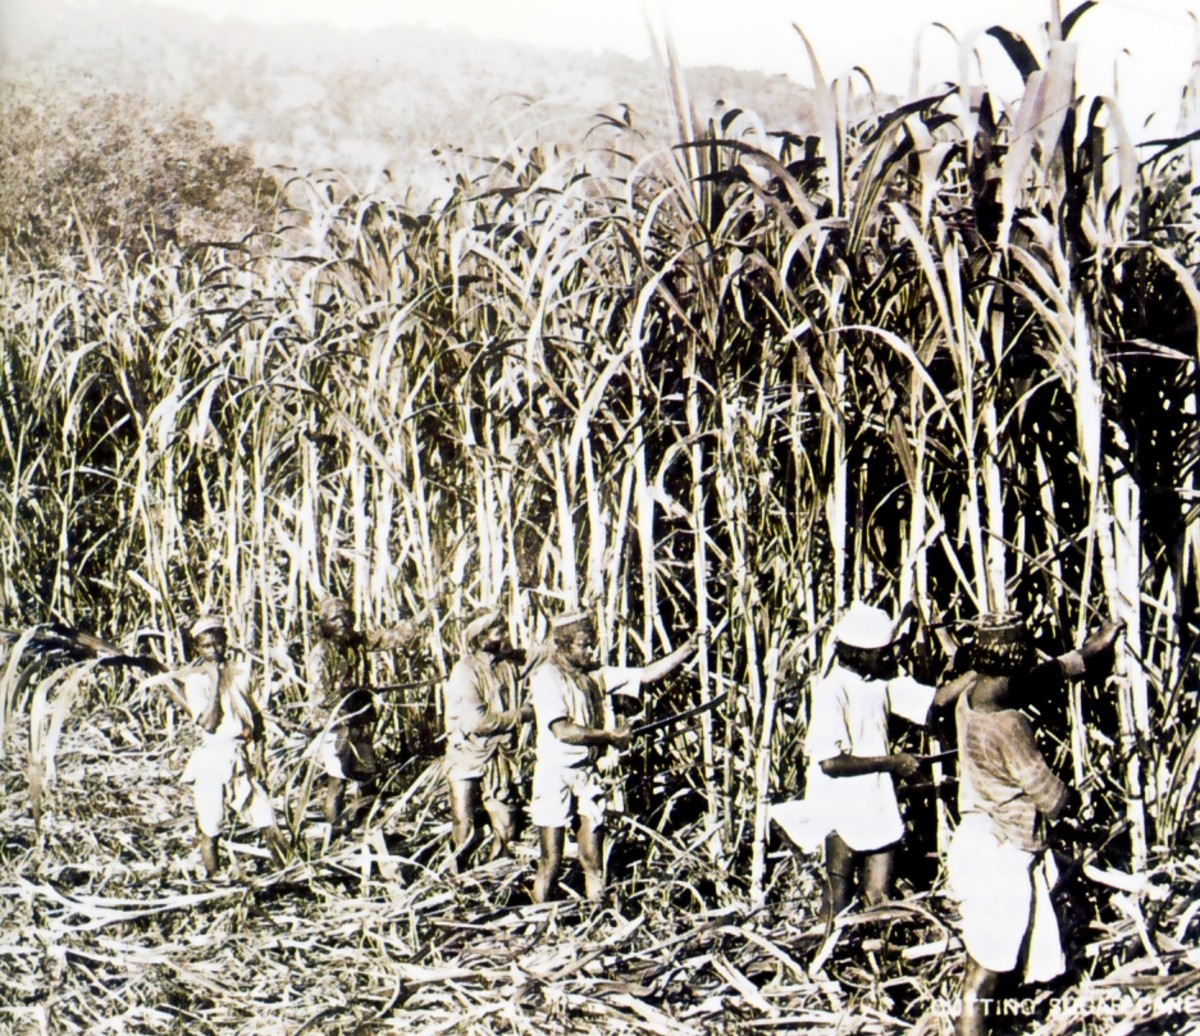 Working in the cane fields